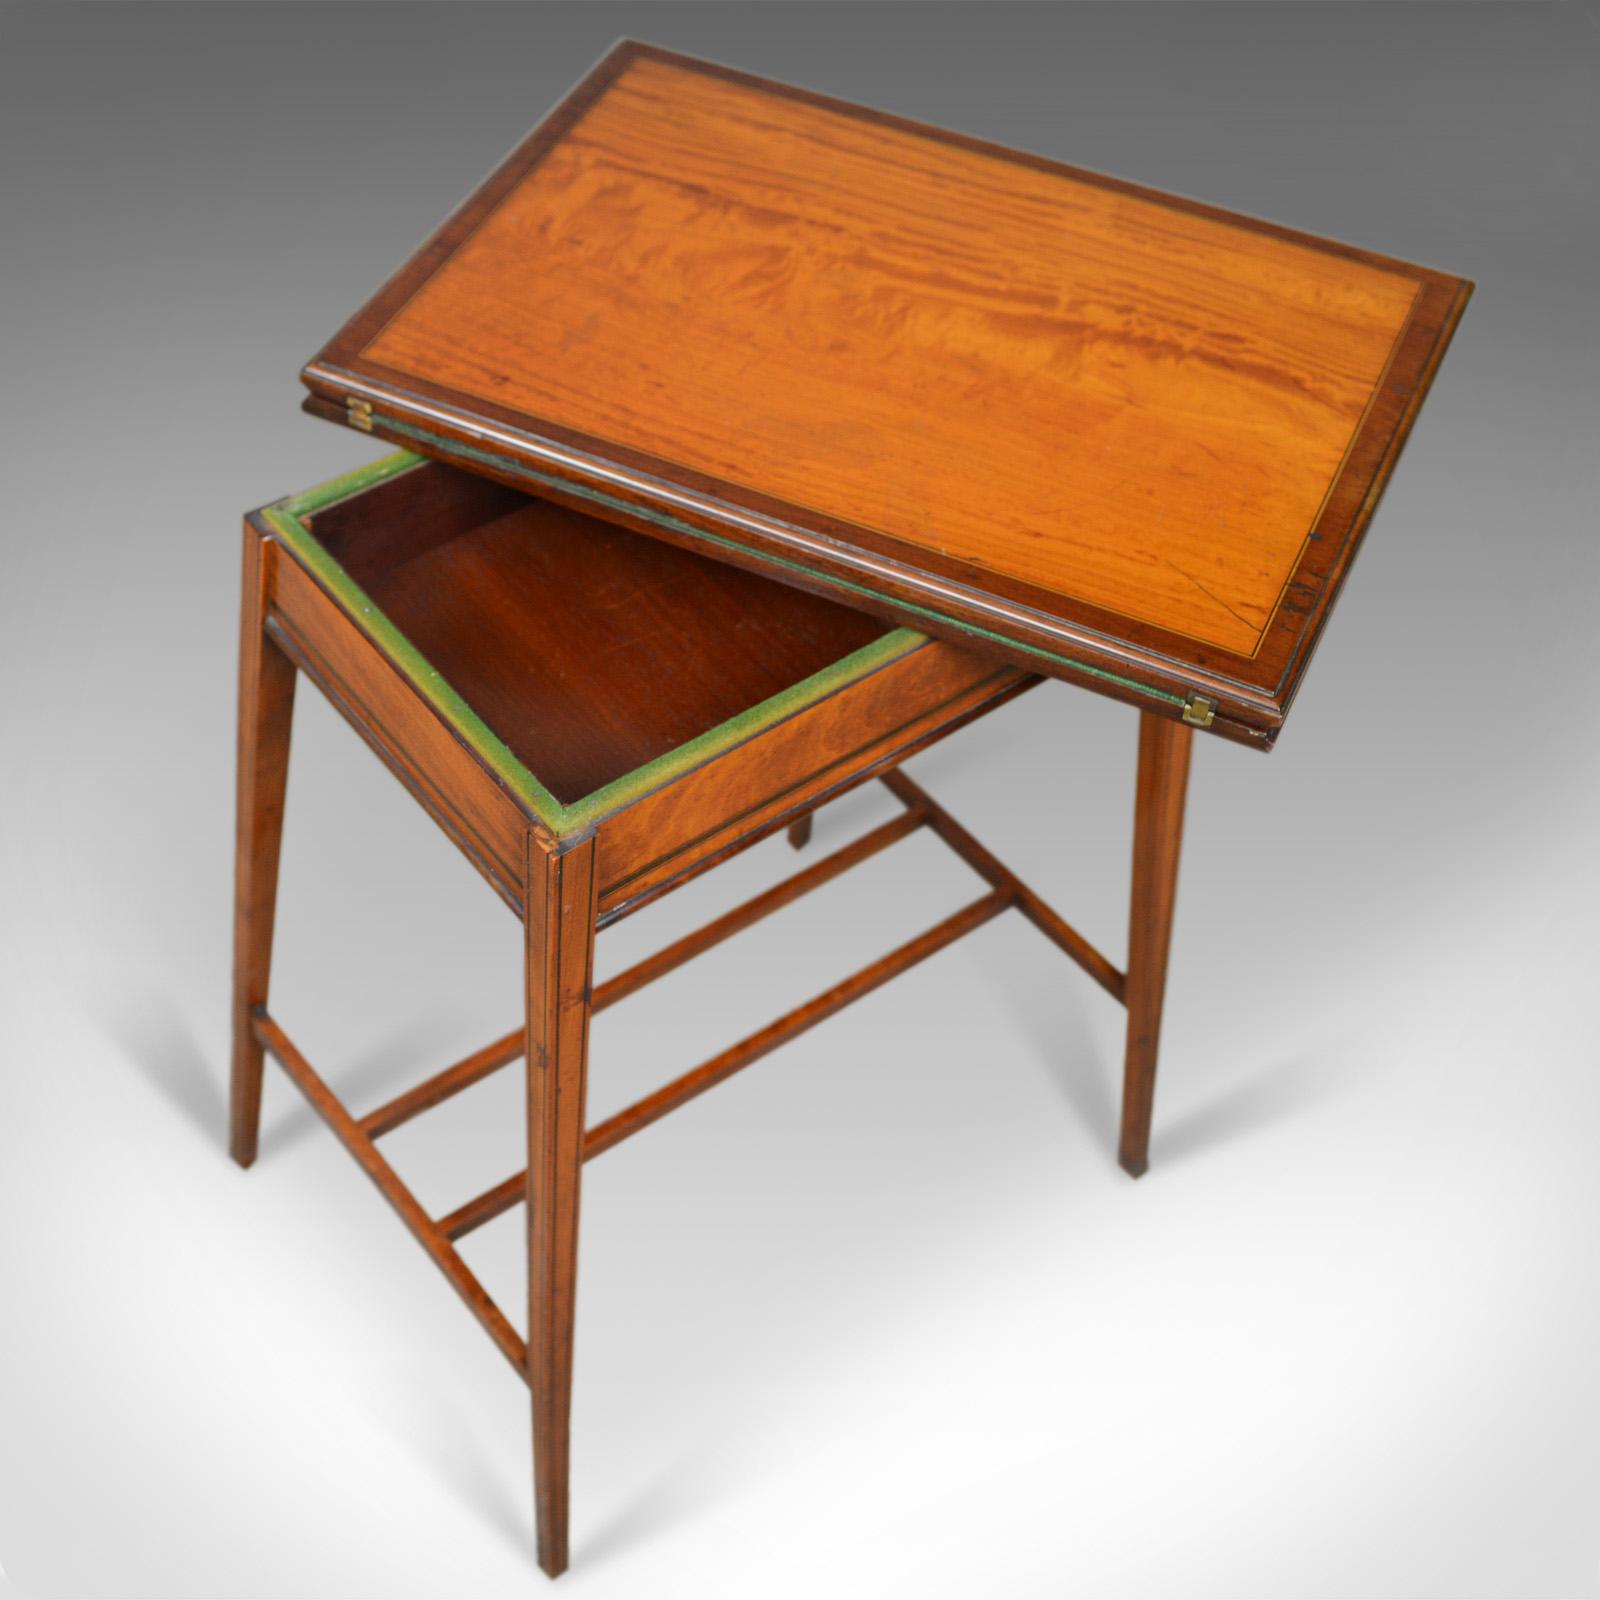 Satinwood Antique Card Table, English, Edwardian, Fold-Over, Games, circa 1910